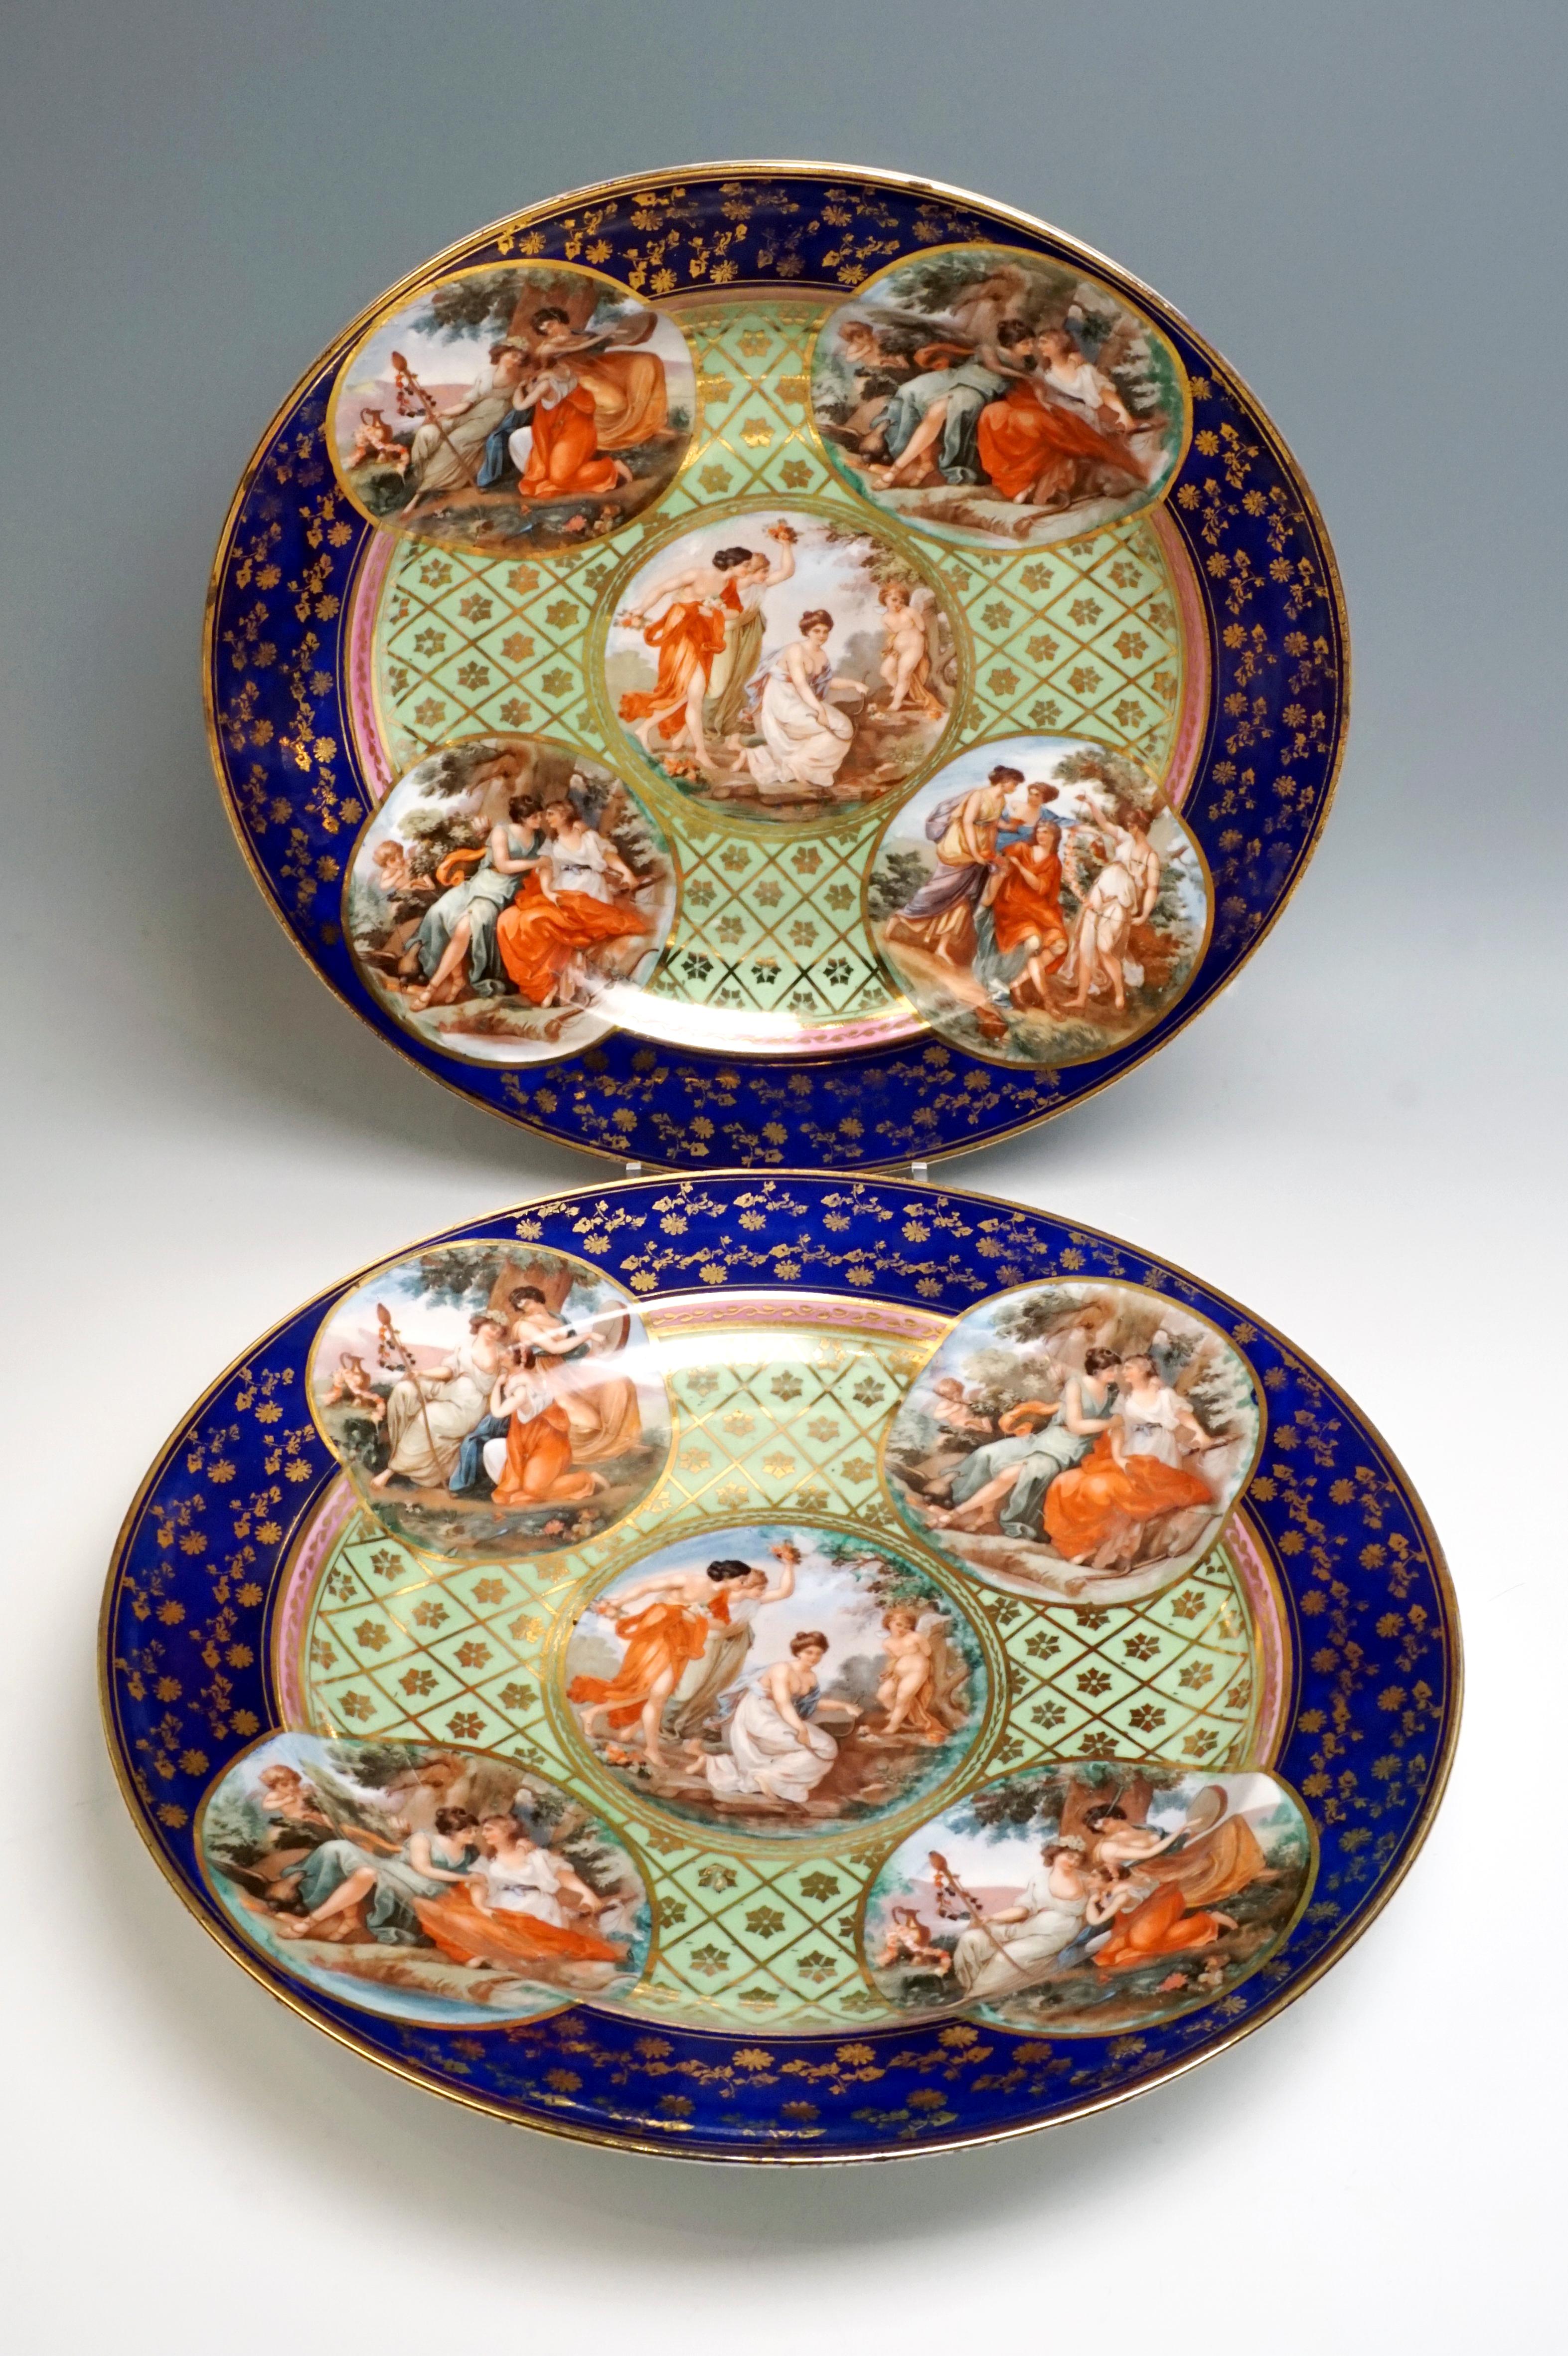 Two large, splendid porcelain plates with elaborate painting: cobalt blue flag with dense, scattered flower painting in gold, delimited by Fine and wider gold rims, collar in pink with a golden bud tendril and subsequent gold rim, mirror with a